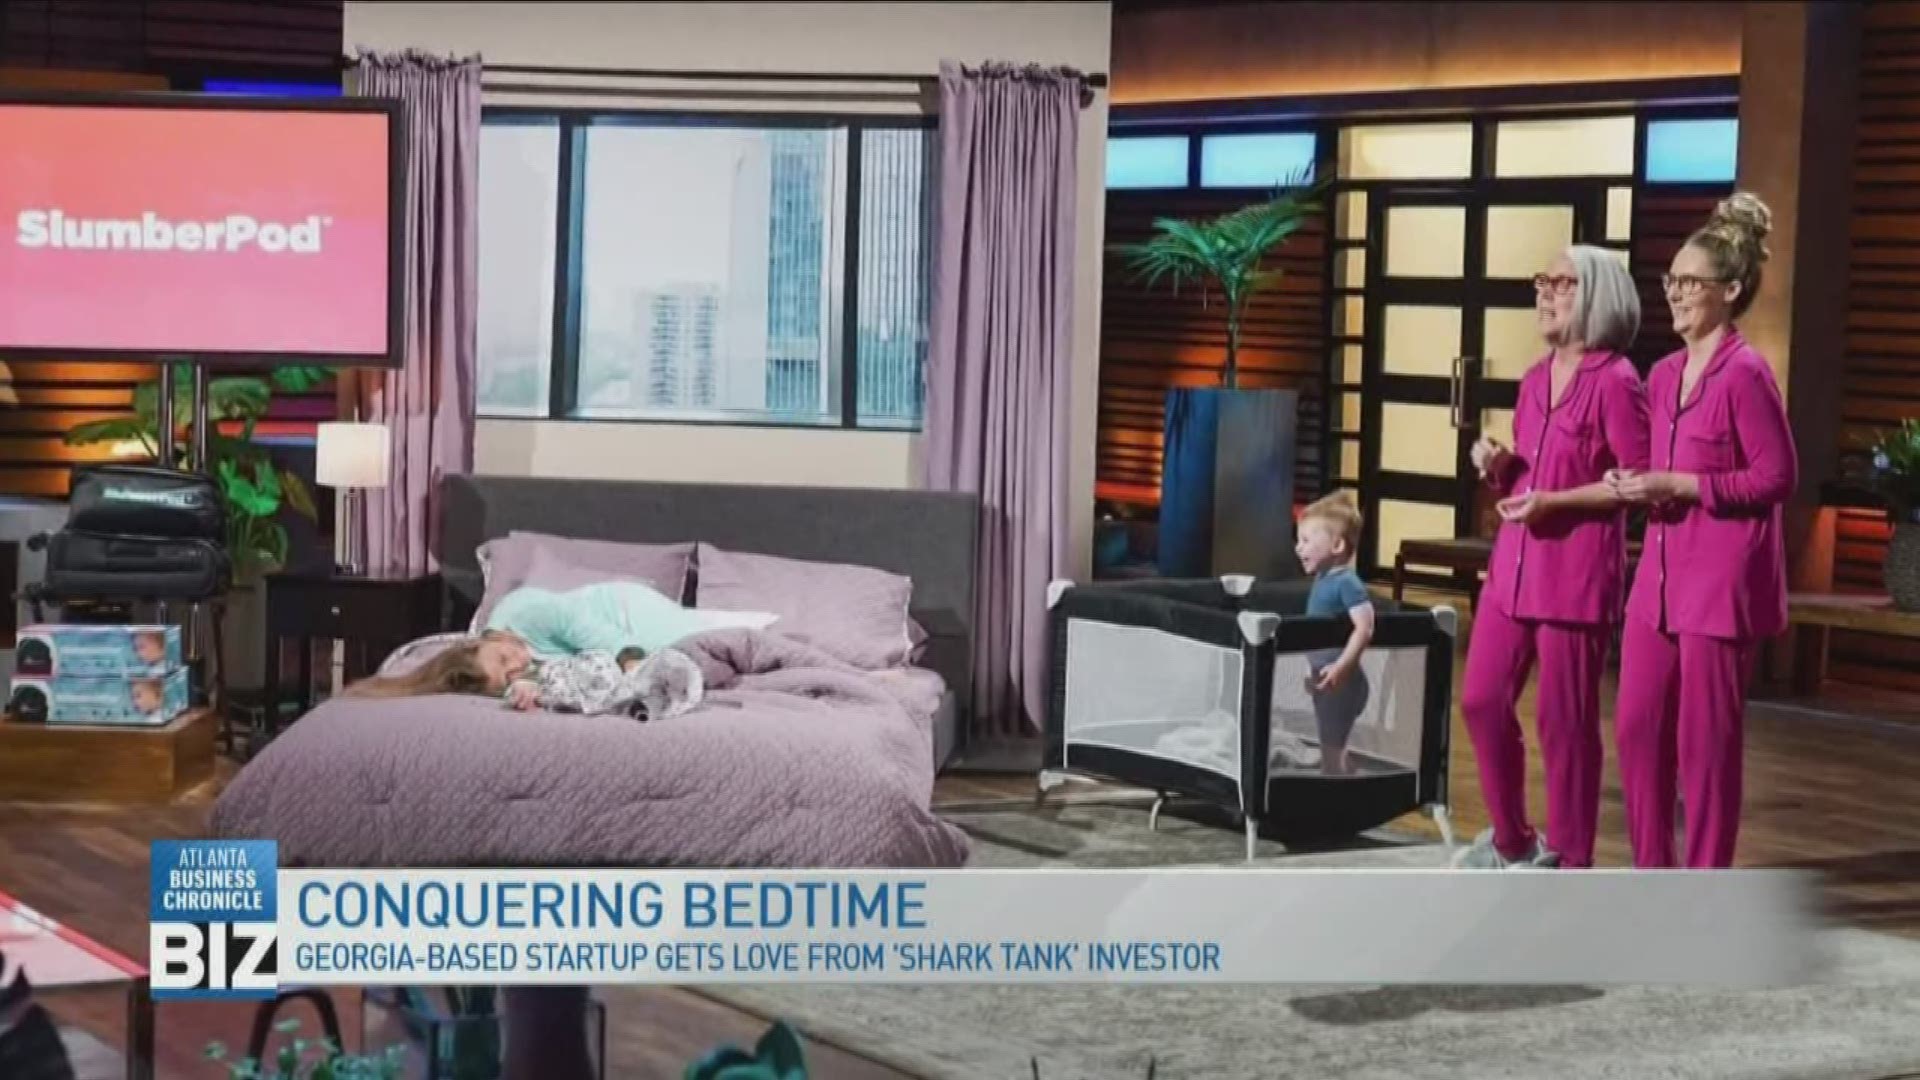 The mother/daughter team from Georgia-based startup "SlumberPod" were featured on 'Shark Tank' and snagged an investor.